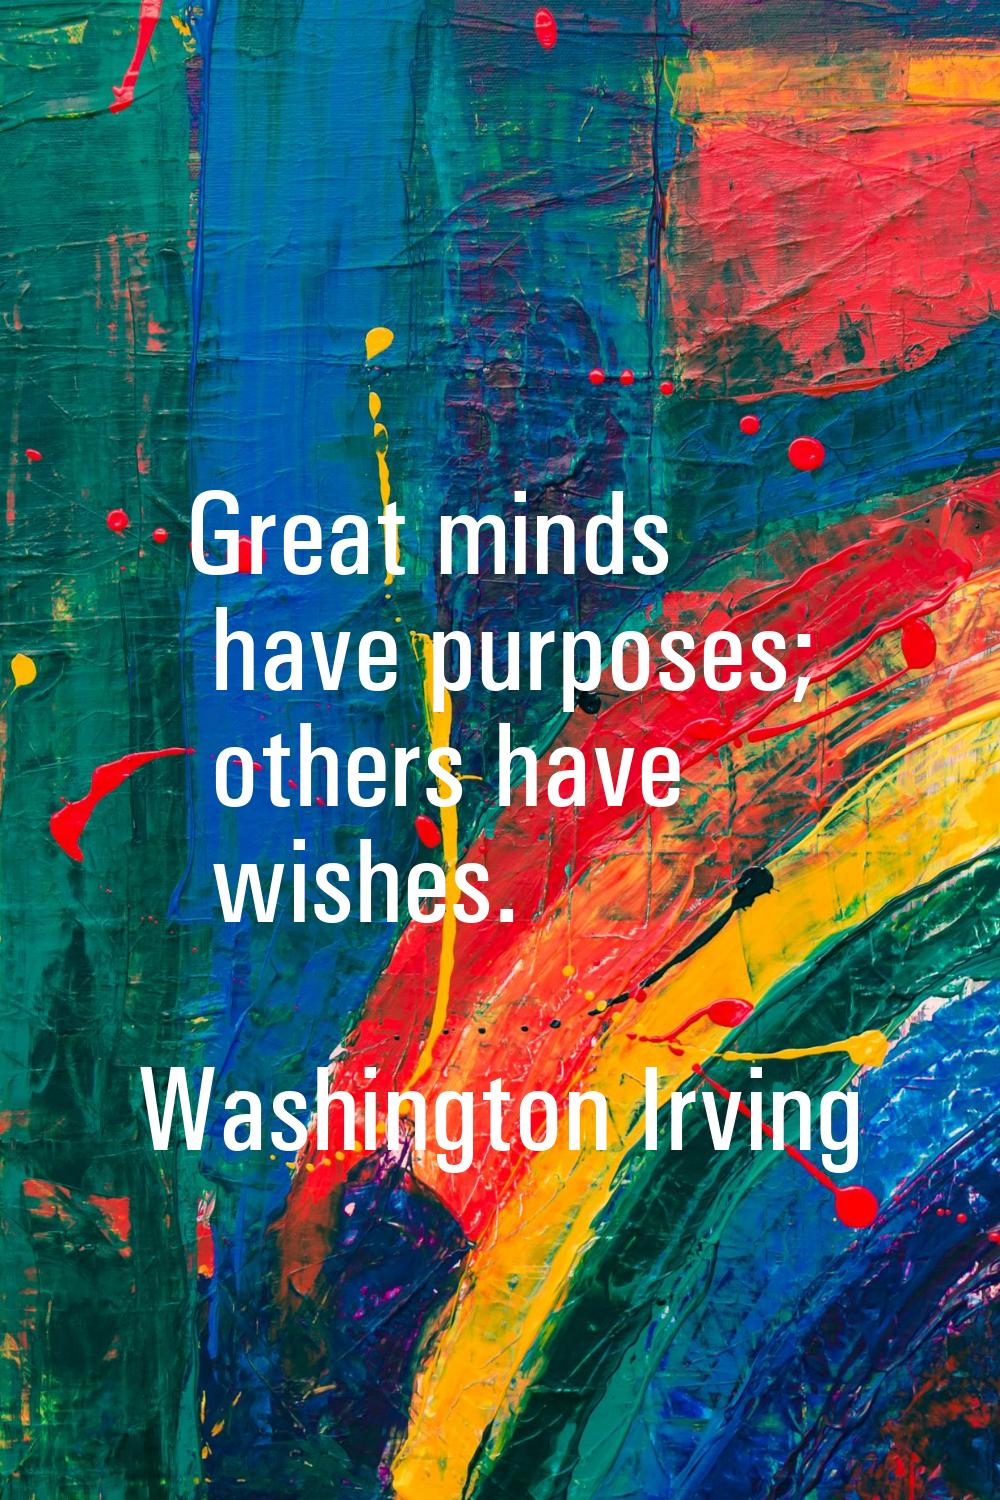 Great minds have purposes; others have wishes.